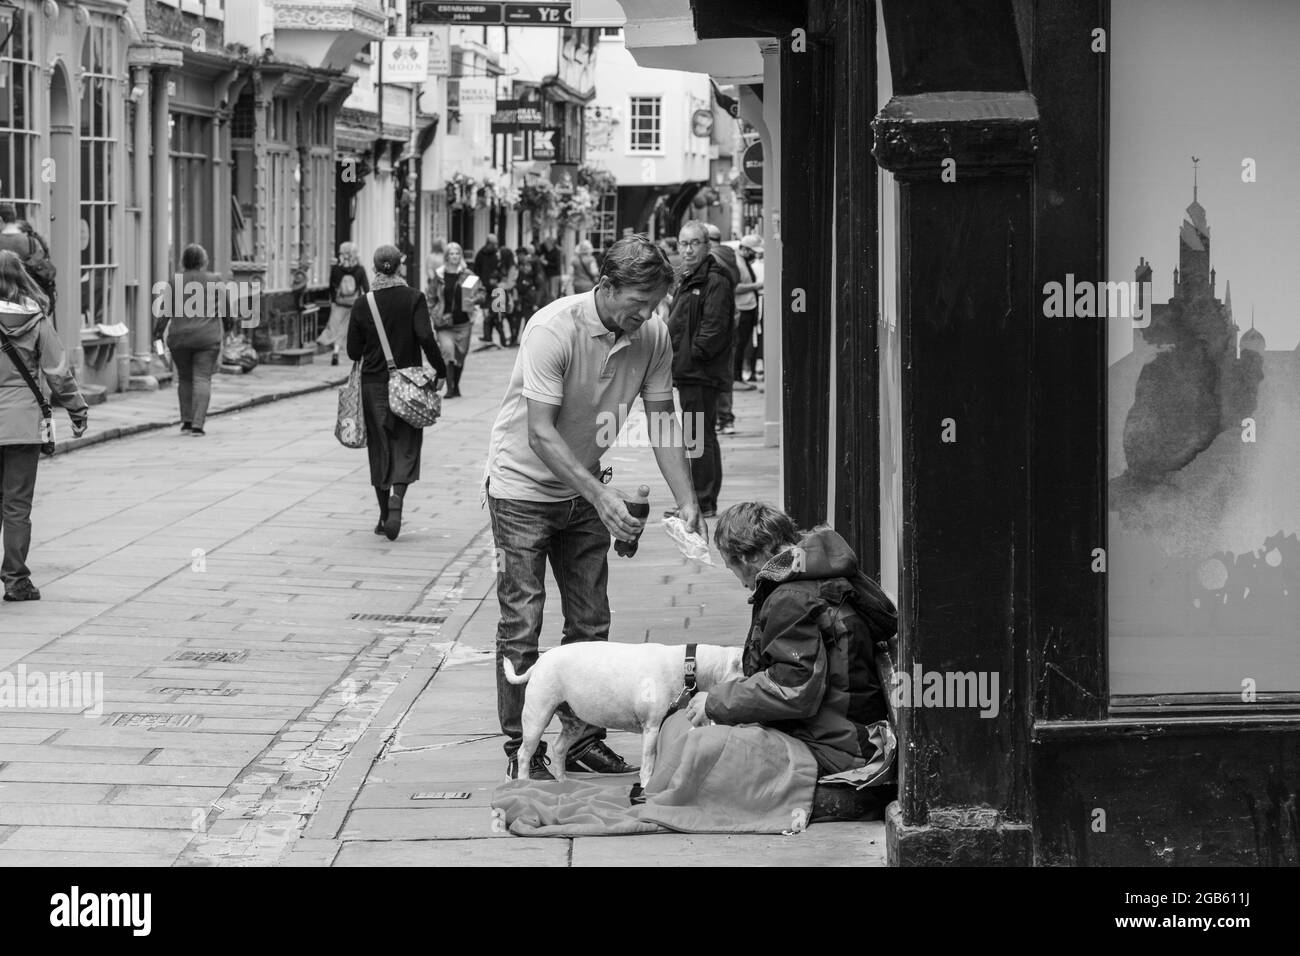 A homeless person sat on a city street receiving a food and beverage donation from a friendly bystander, York, North Yorkshire, England, United Kingdom. Stock Photo